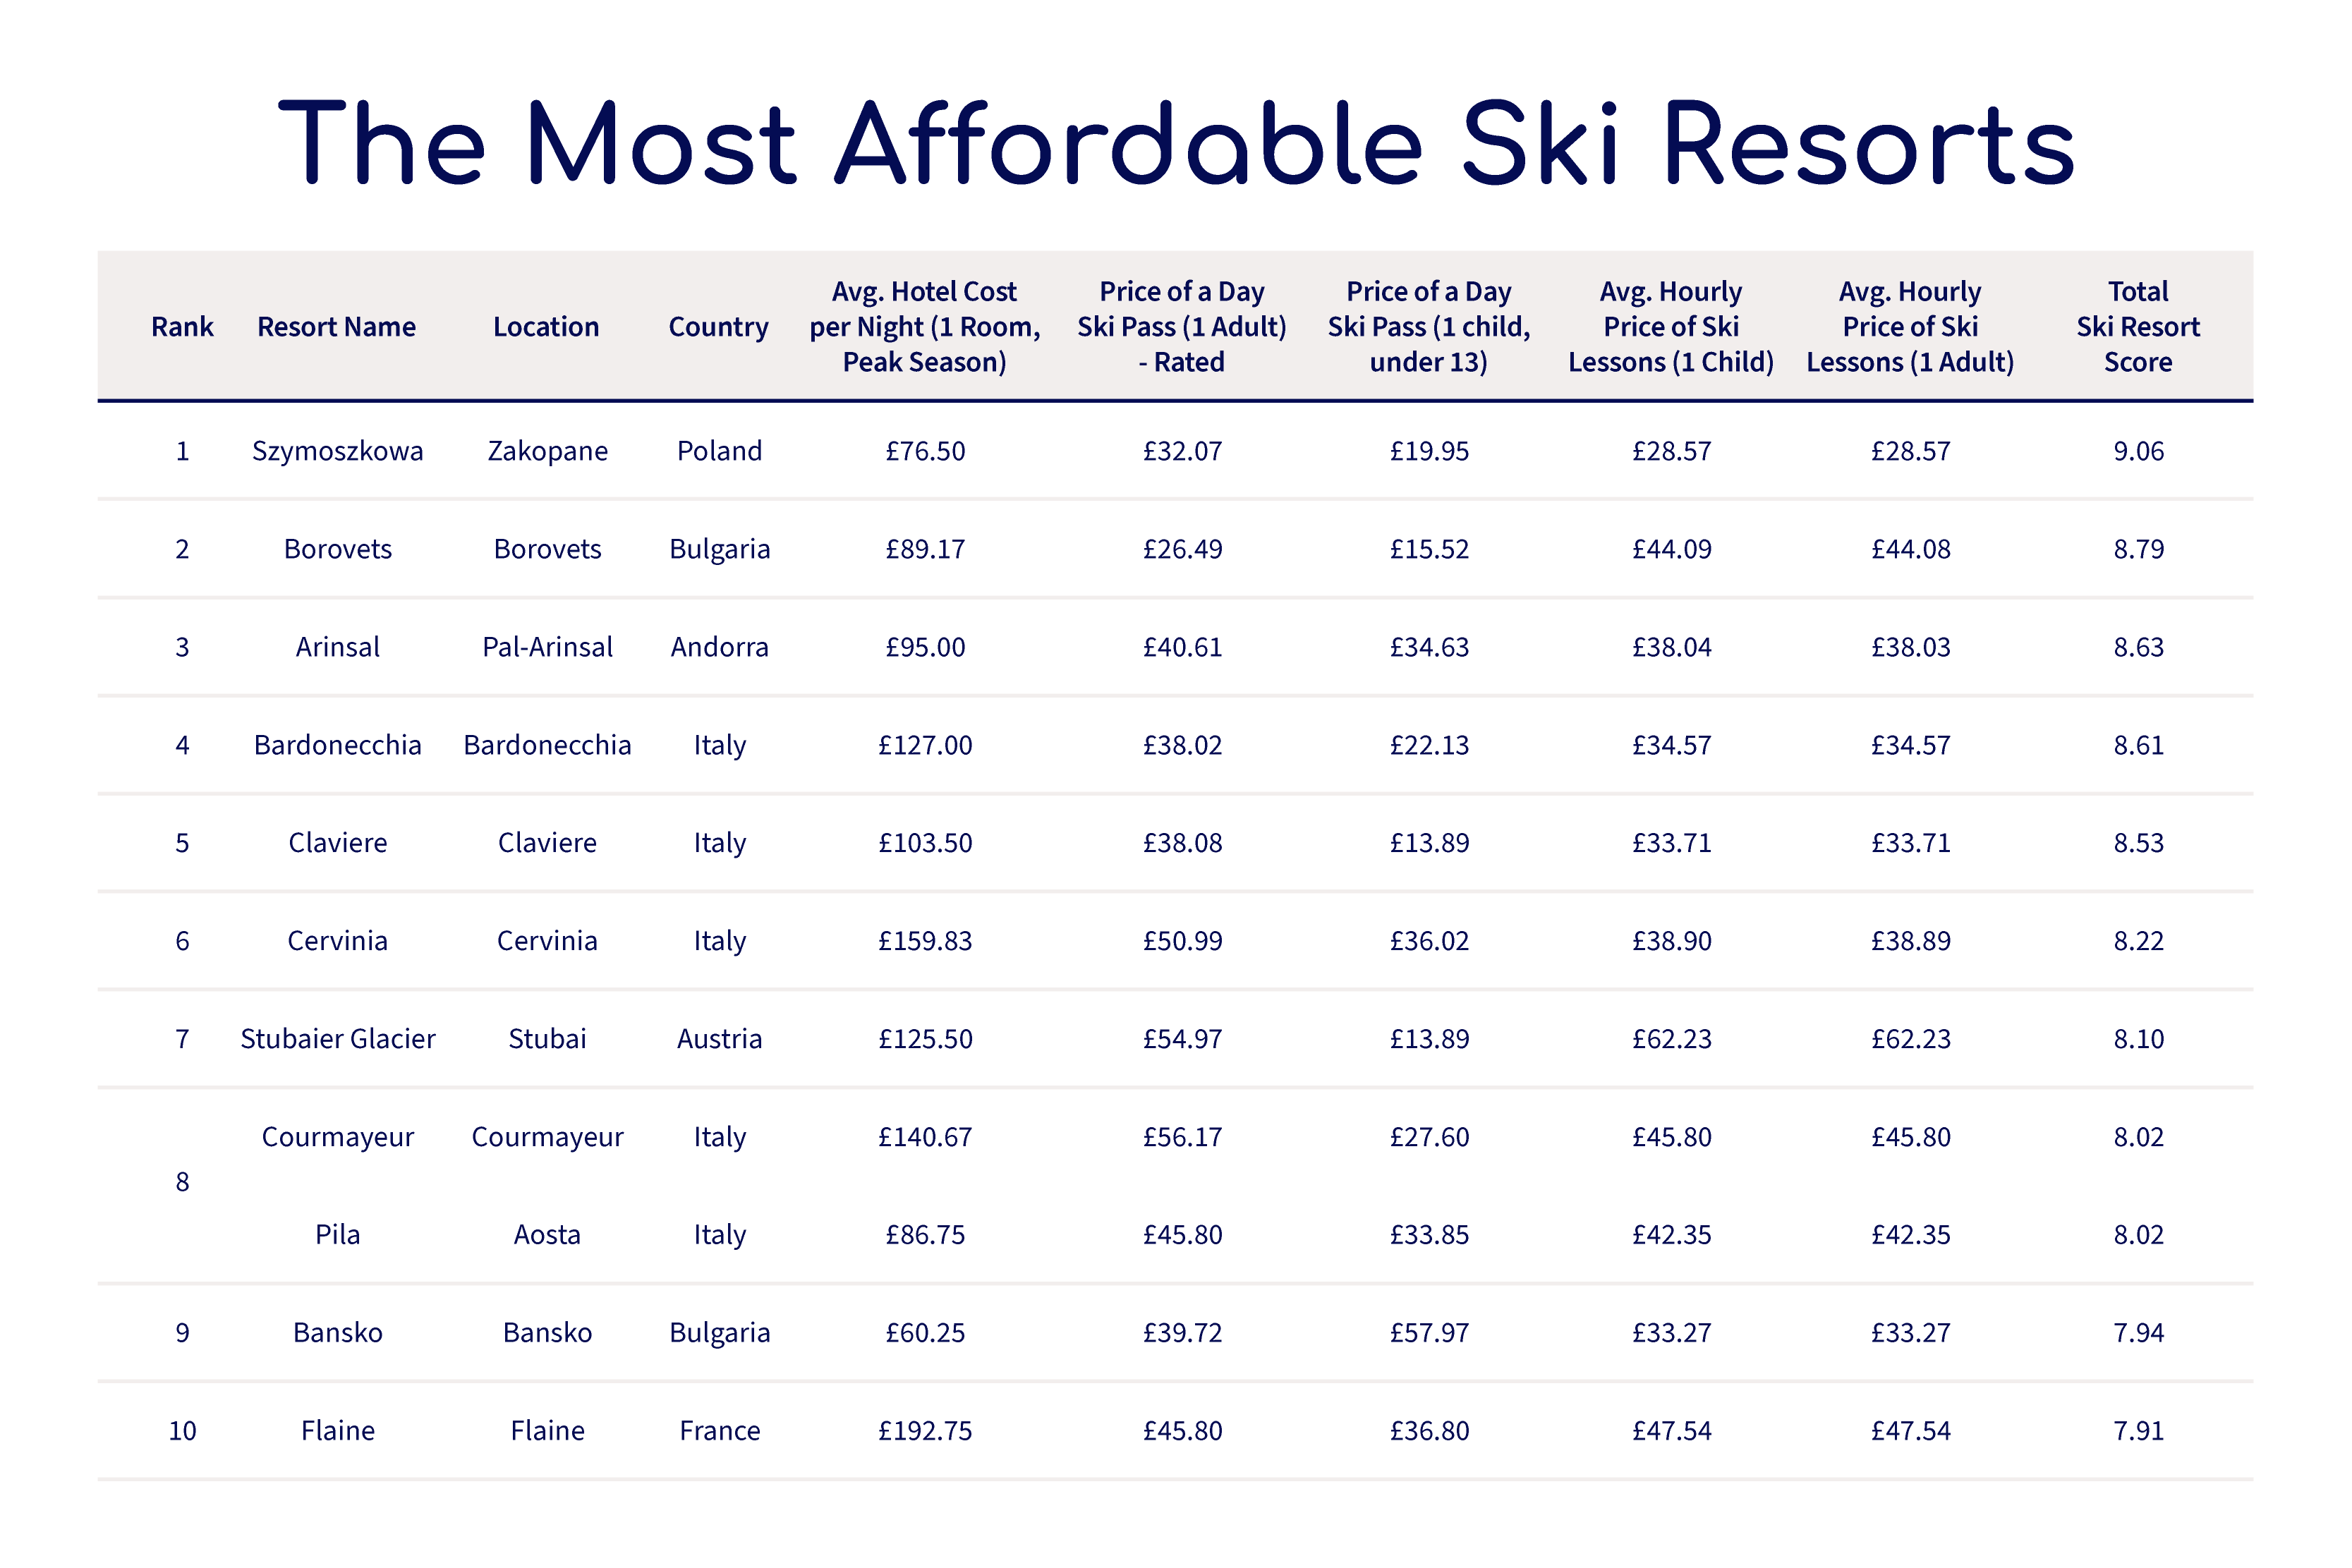 The Most Affordable Ski Resorts